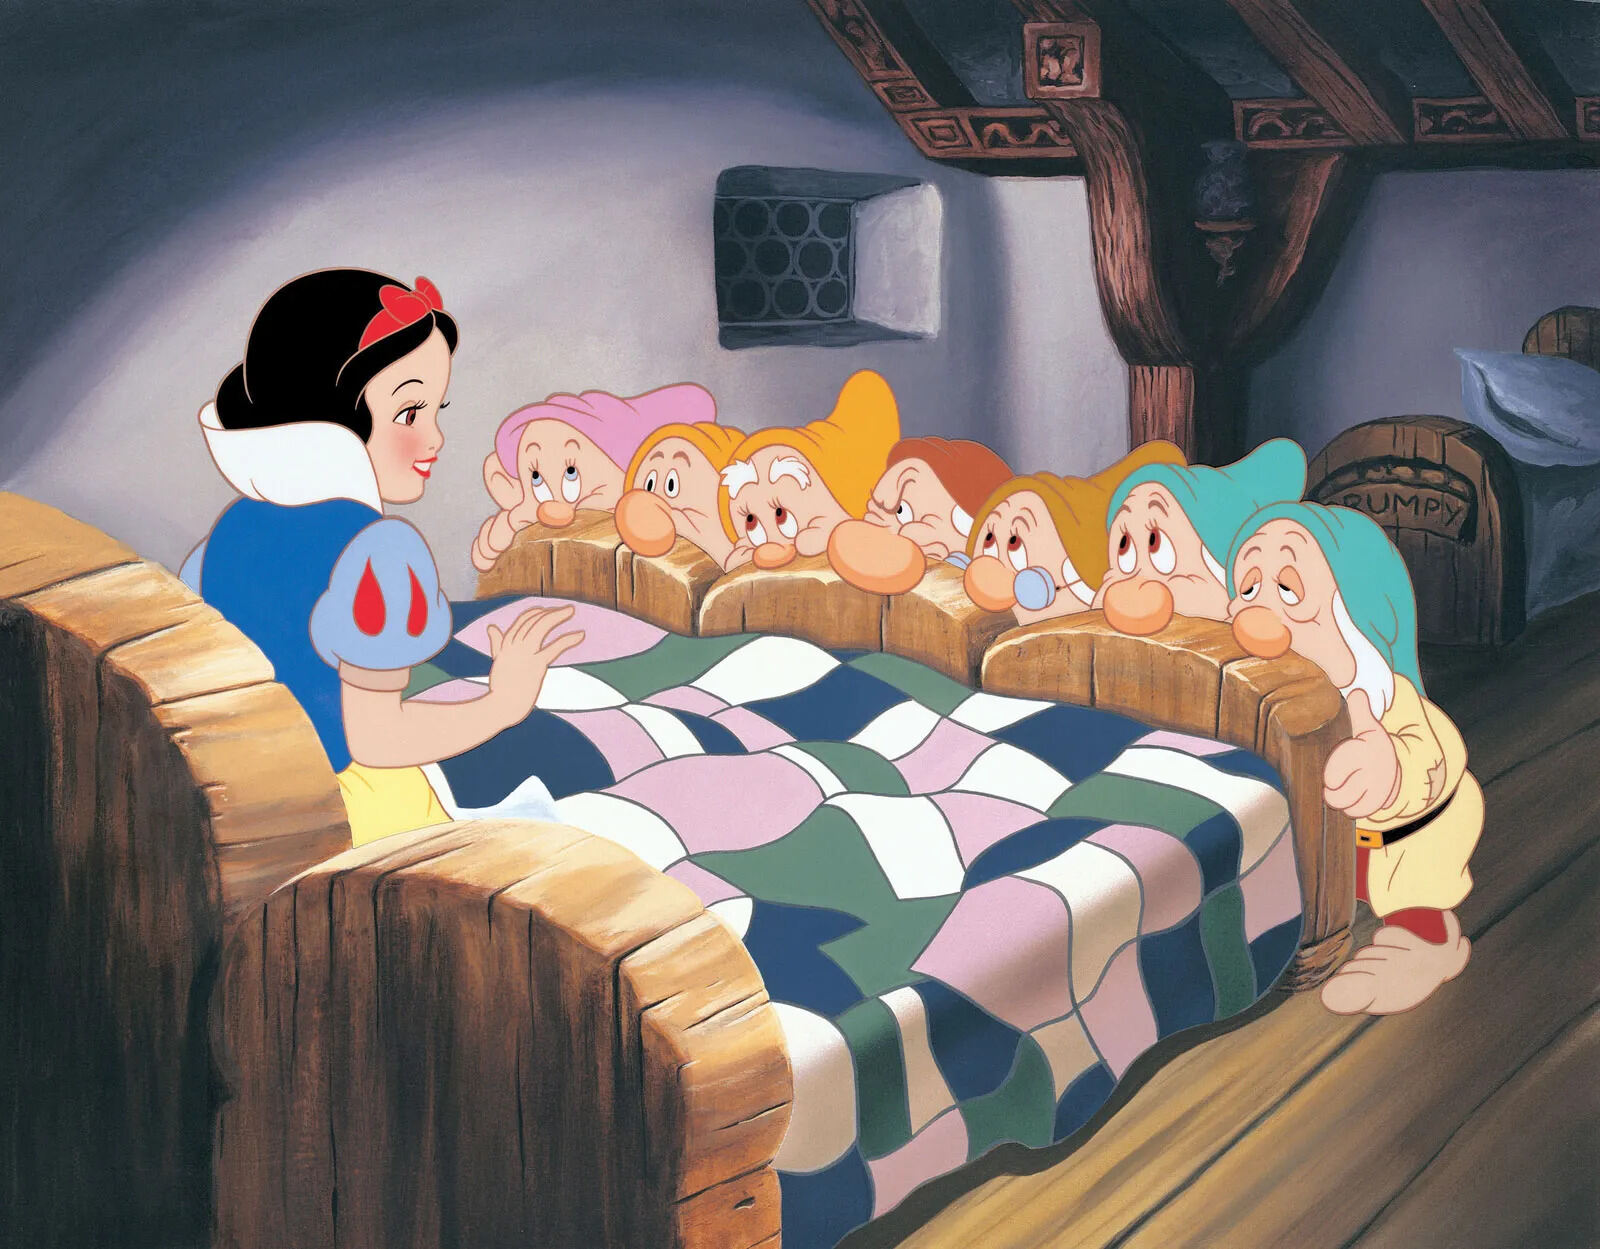 45-facts-about-the-movie-snow-white-and-the-seven-dwarfs